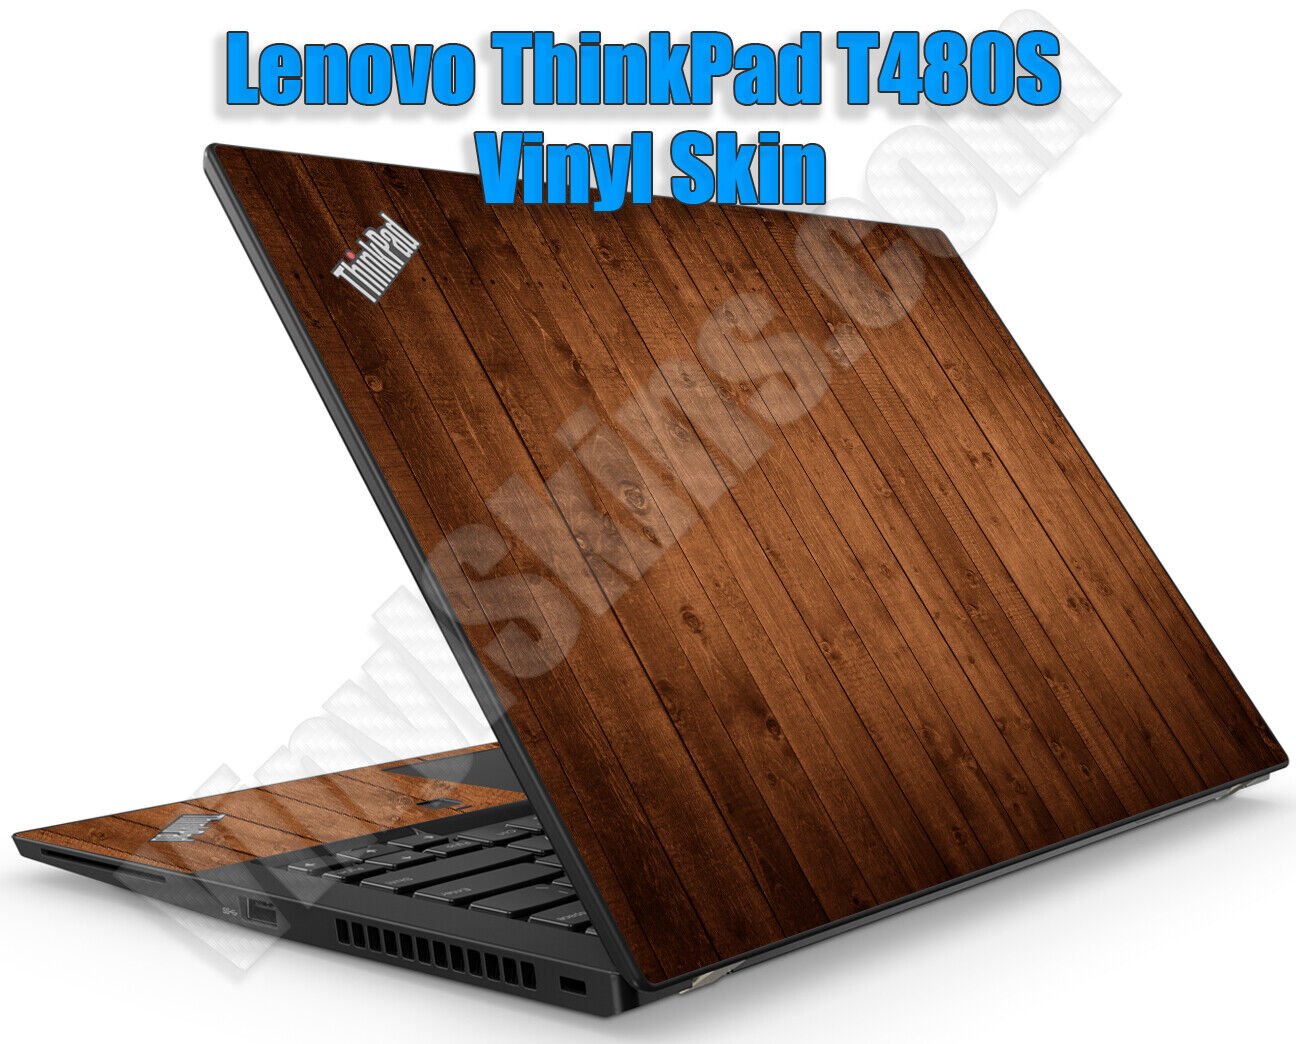 Choose Any Vinyl Skin / Decal Design for the Lenovo ThinkPad T480S -Free US Ship